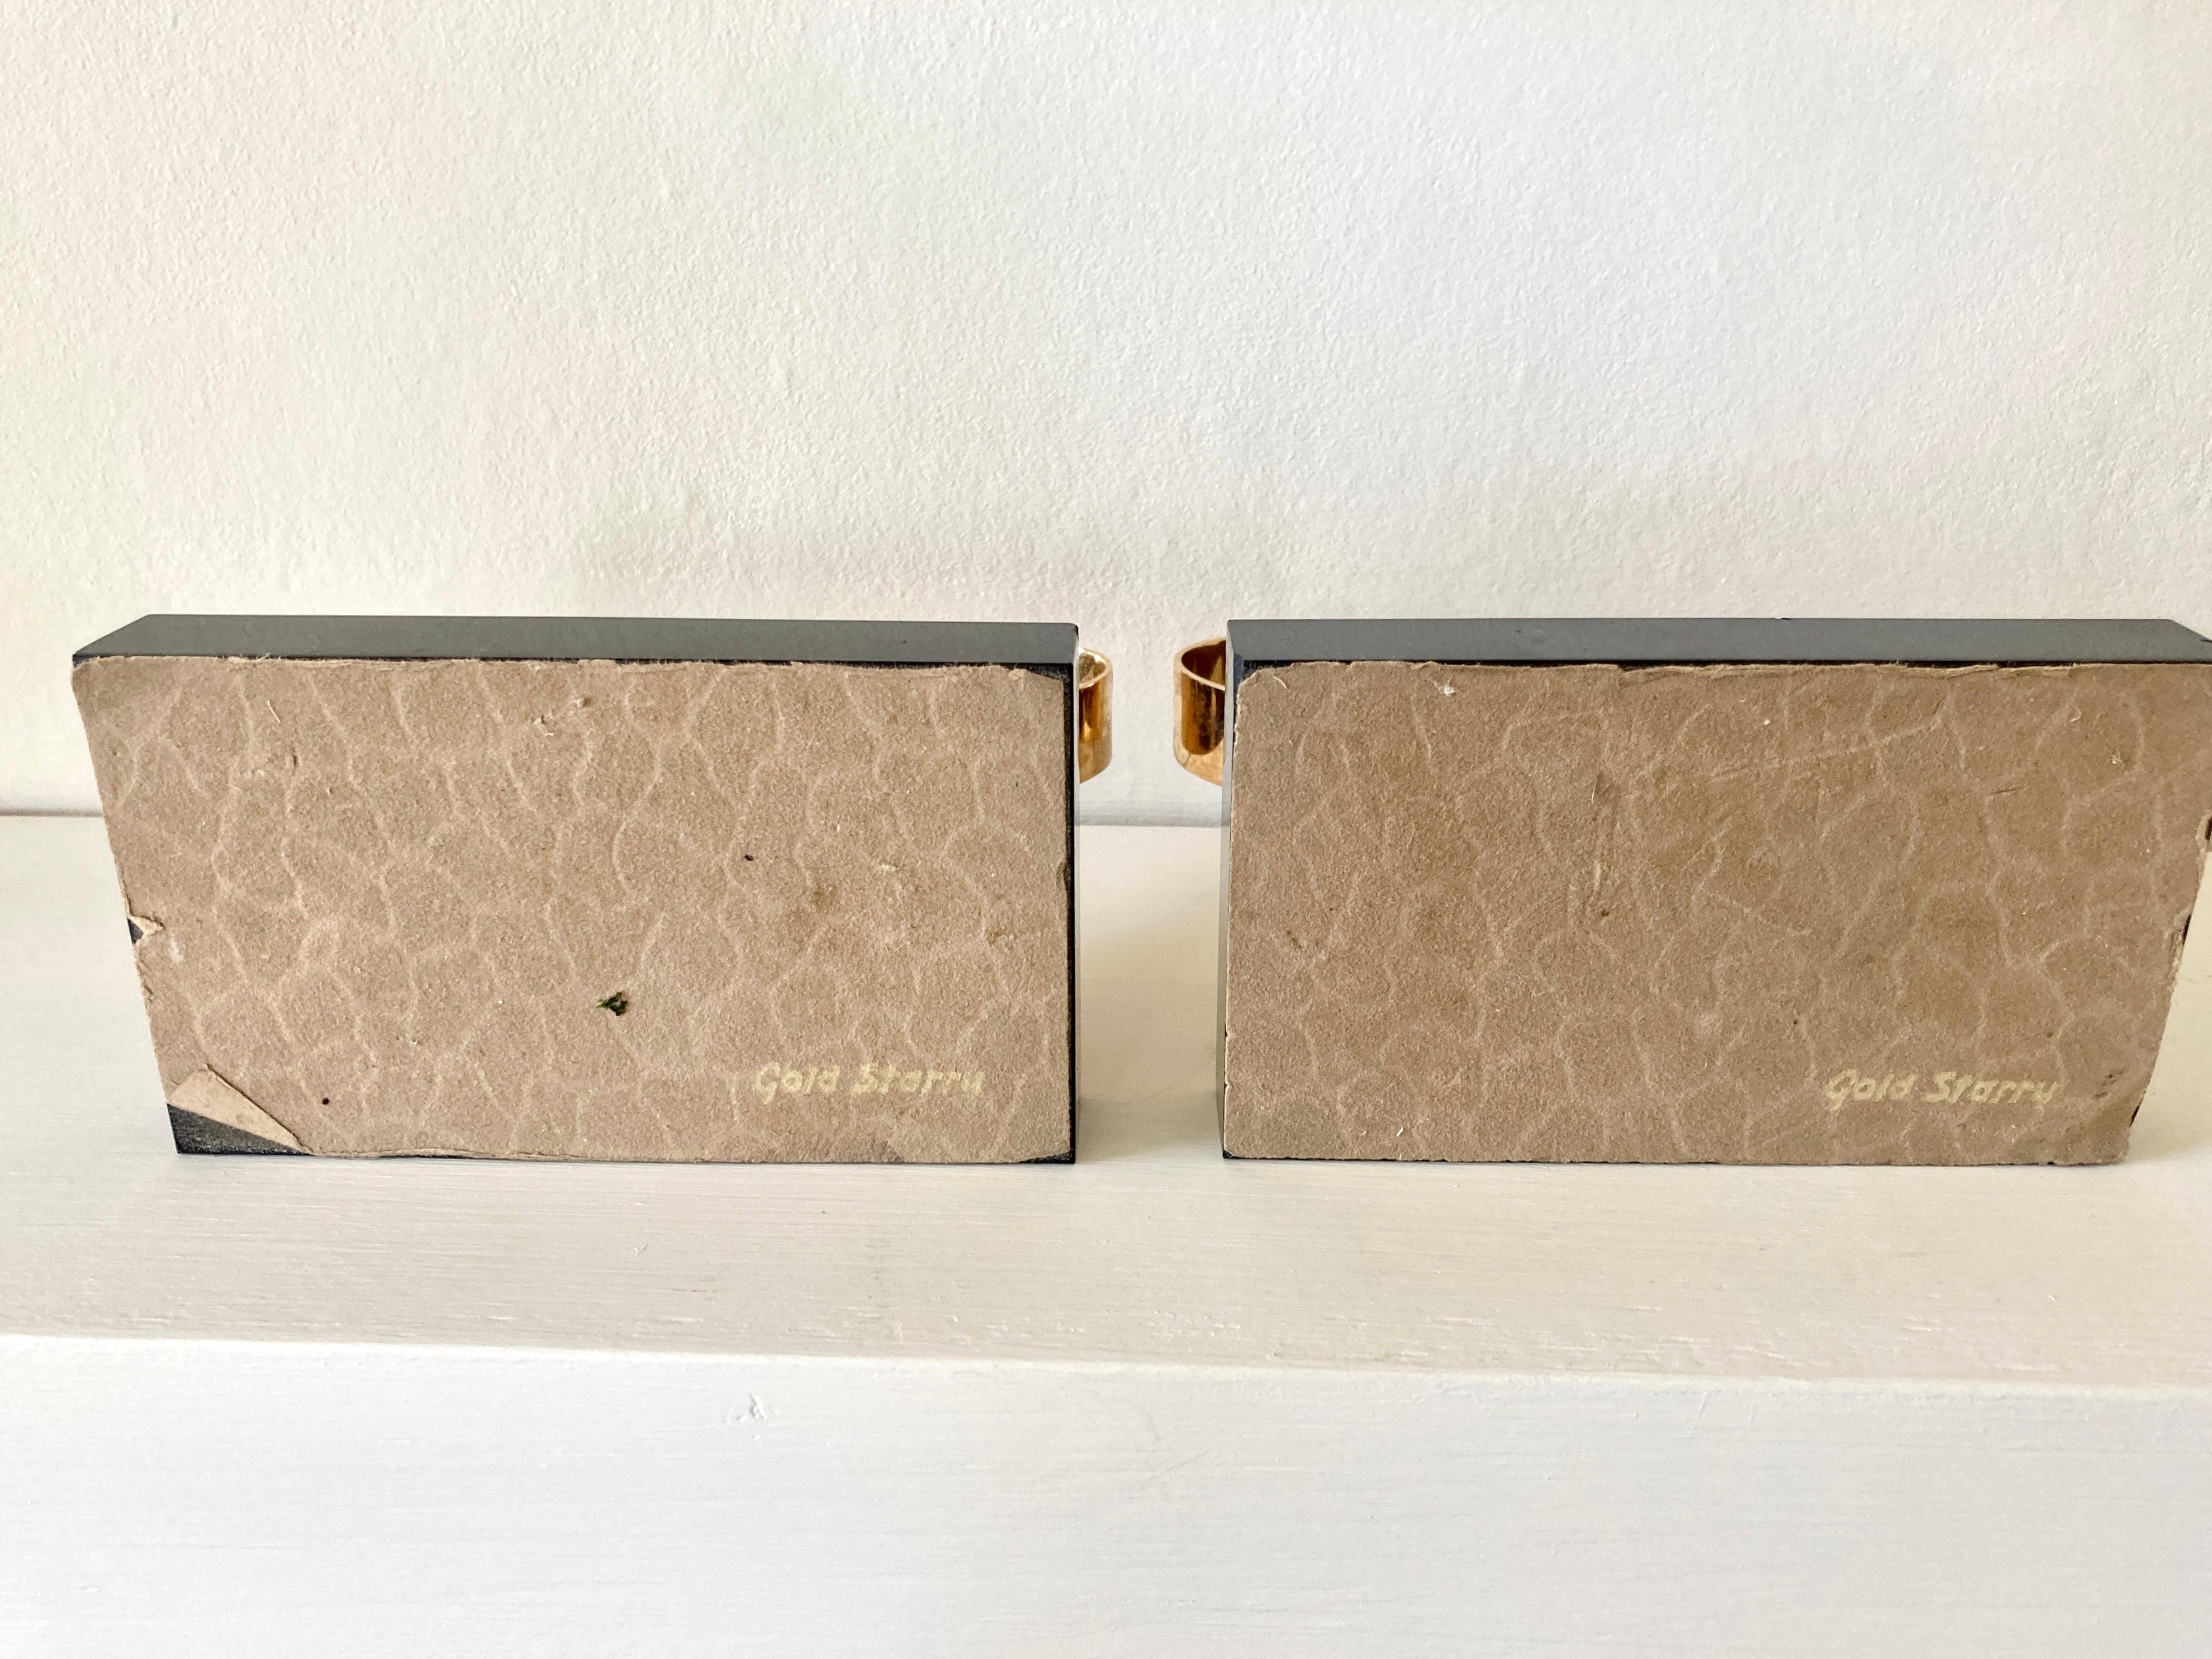 Art Deco Modernist Bookends in Marble & Gold Plate by Gold Starry, France 5